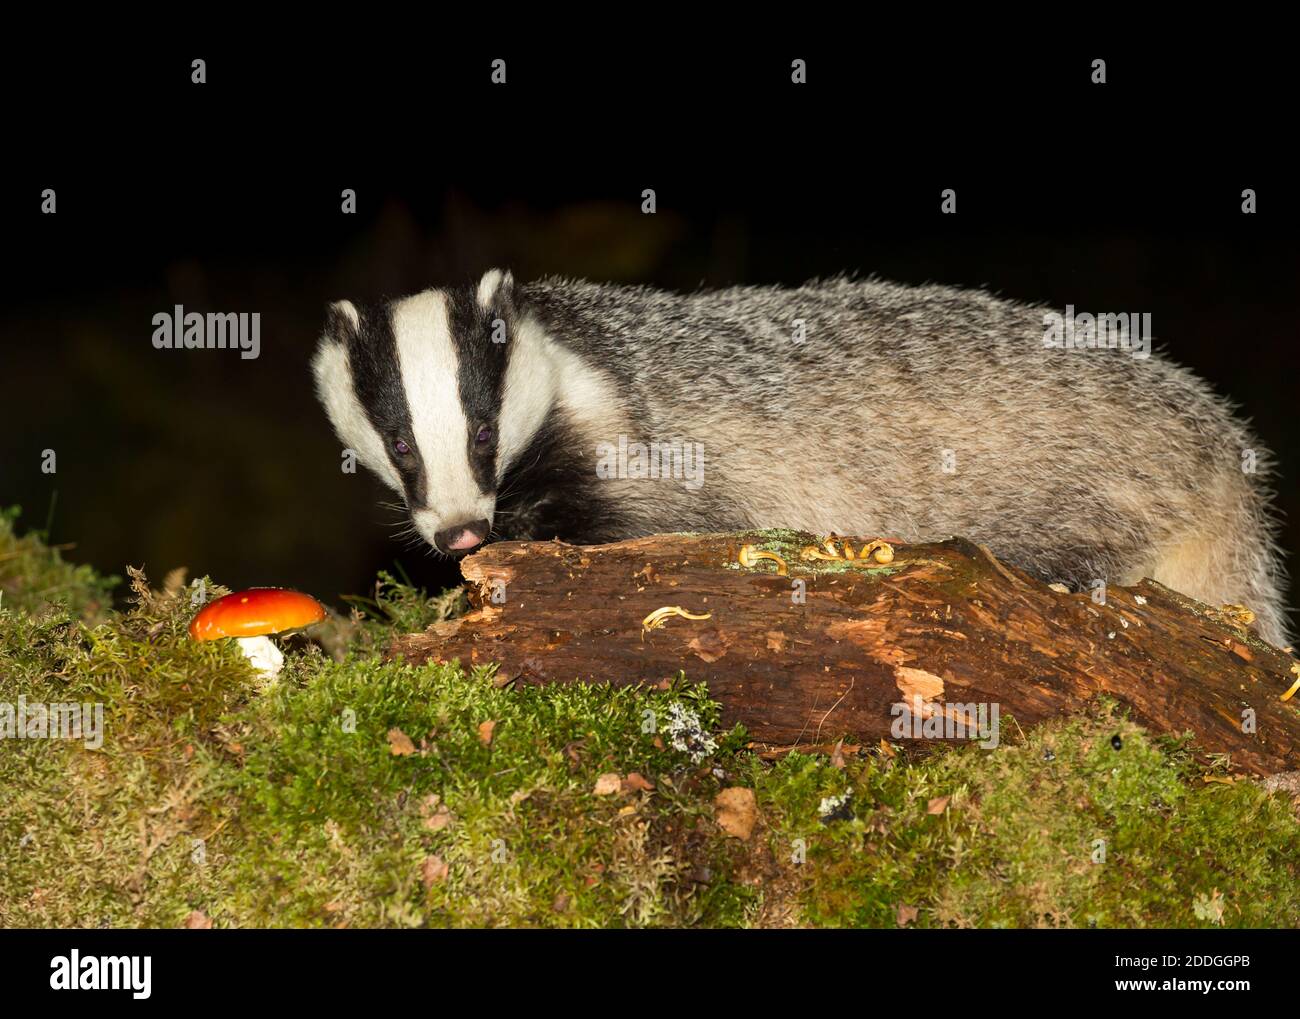 Badger, Scientific name, Meles Meles.  Wild, native badger foraging on a decaying log at night time. Facing forward with green moss and red Fly Agaric Stock Photo